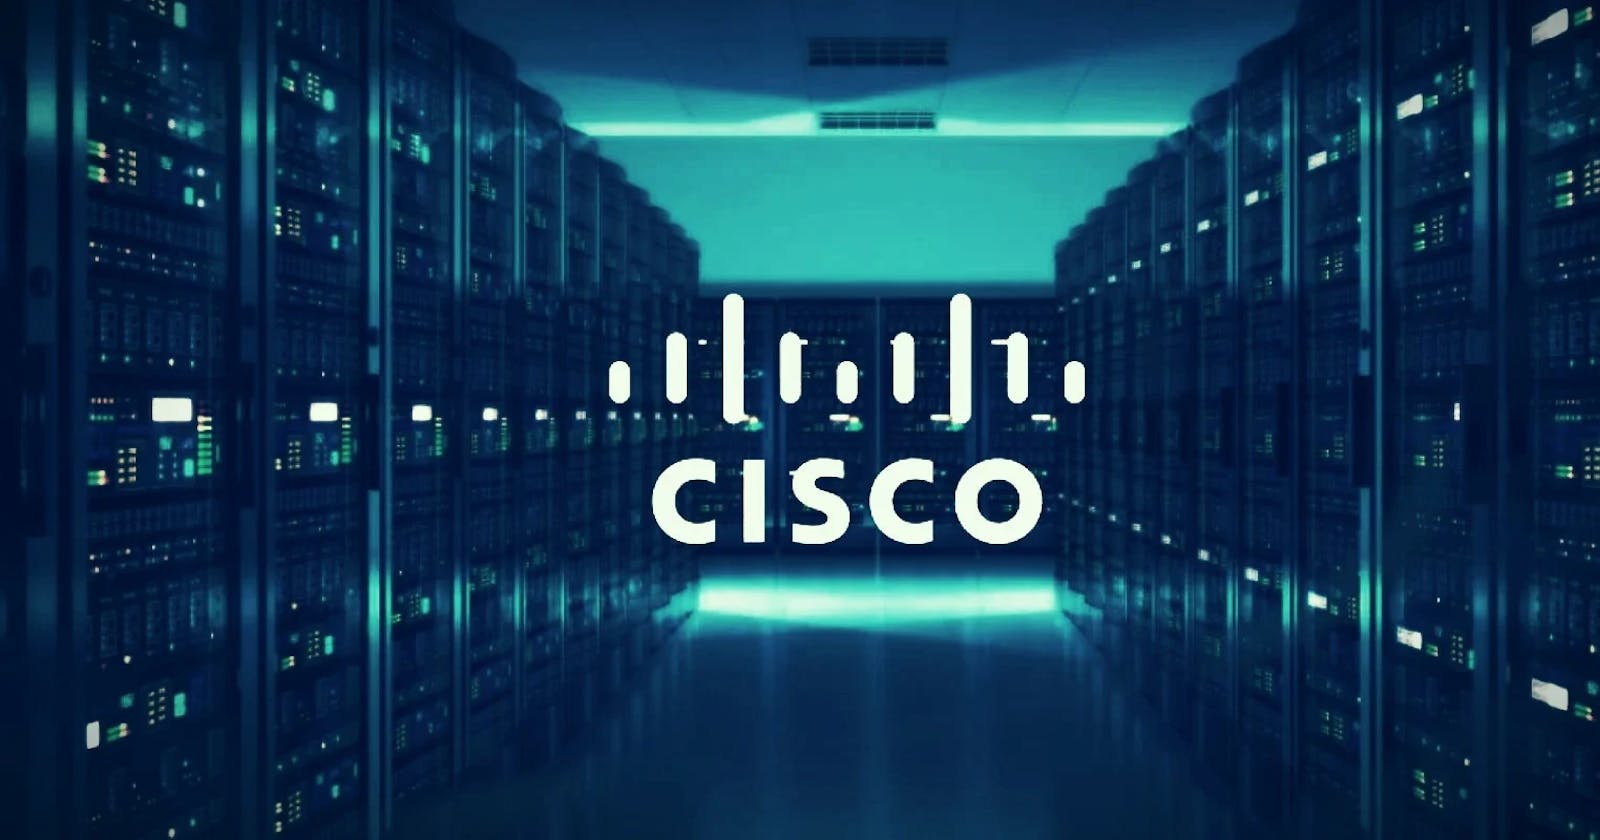 Root Level Escalation Flaw in Cisco Integrated Management Controller (IMC)